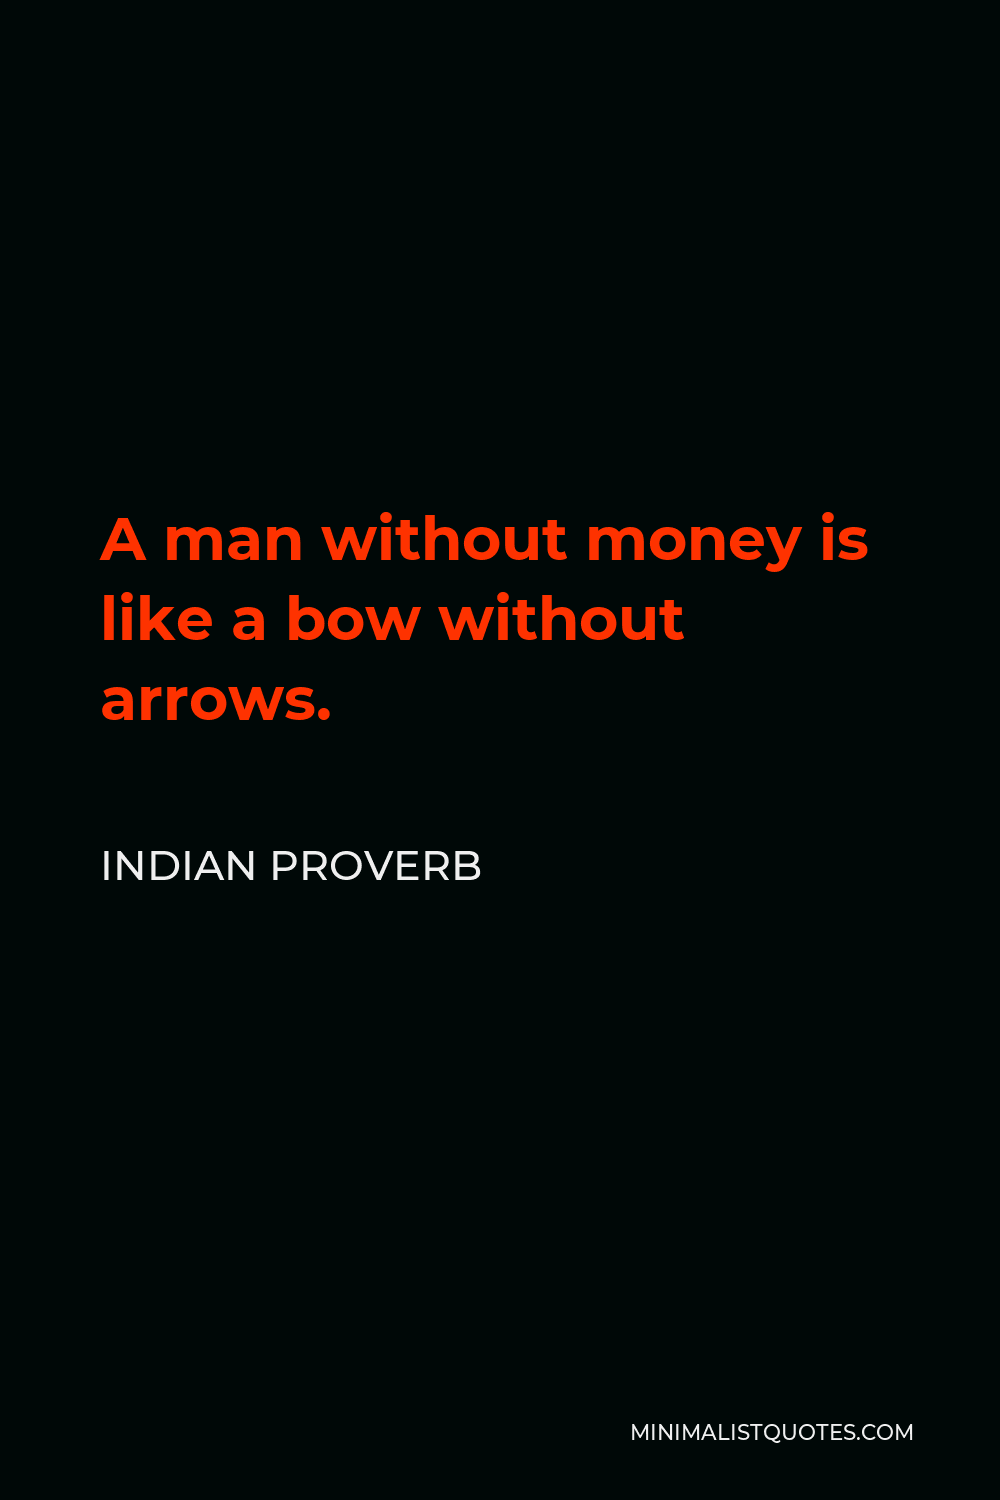 Indian Proverb Quote - A man without money is like a bow without arrows.